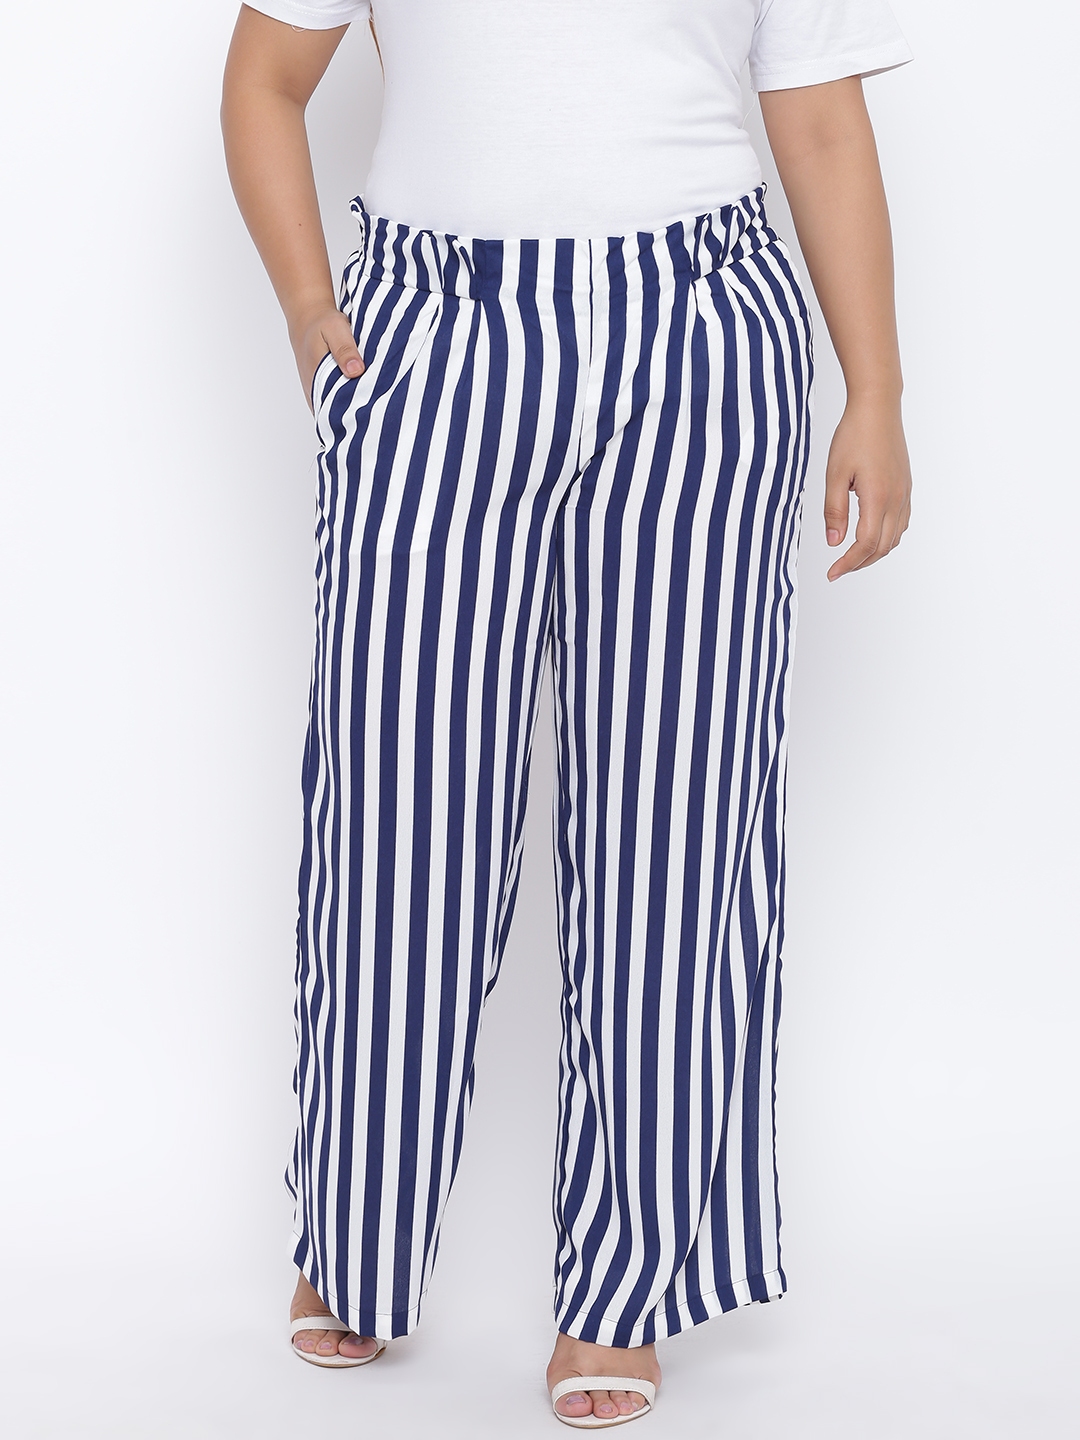 Buy INFISPACE Women High waisted Blue Striped Palazzo Trouser Pants for  FormalCasual wear with Pockets Free size Upto 34 inches at Amazonin